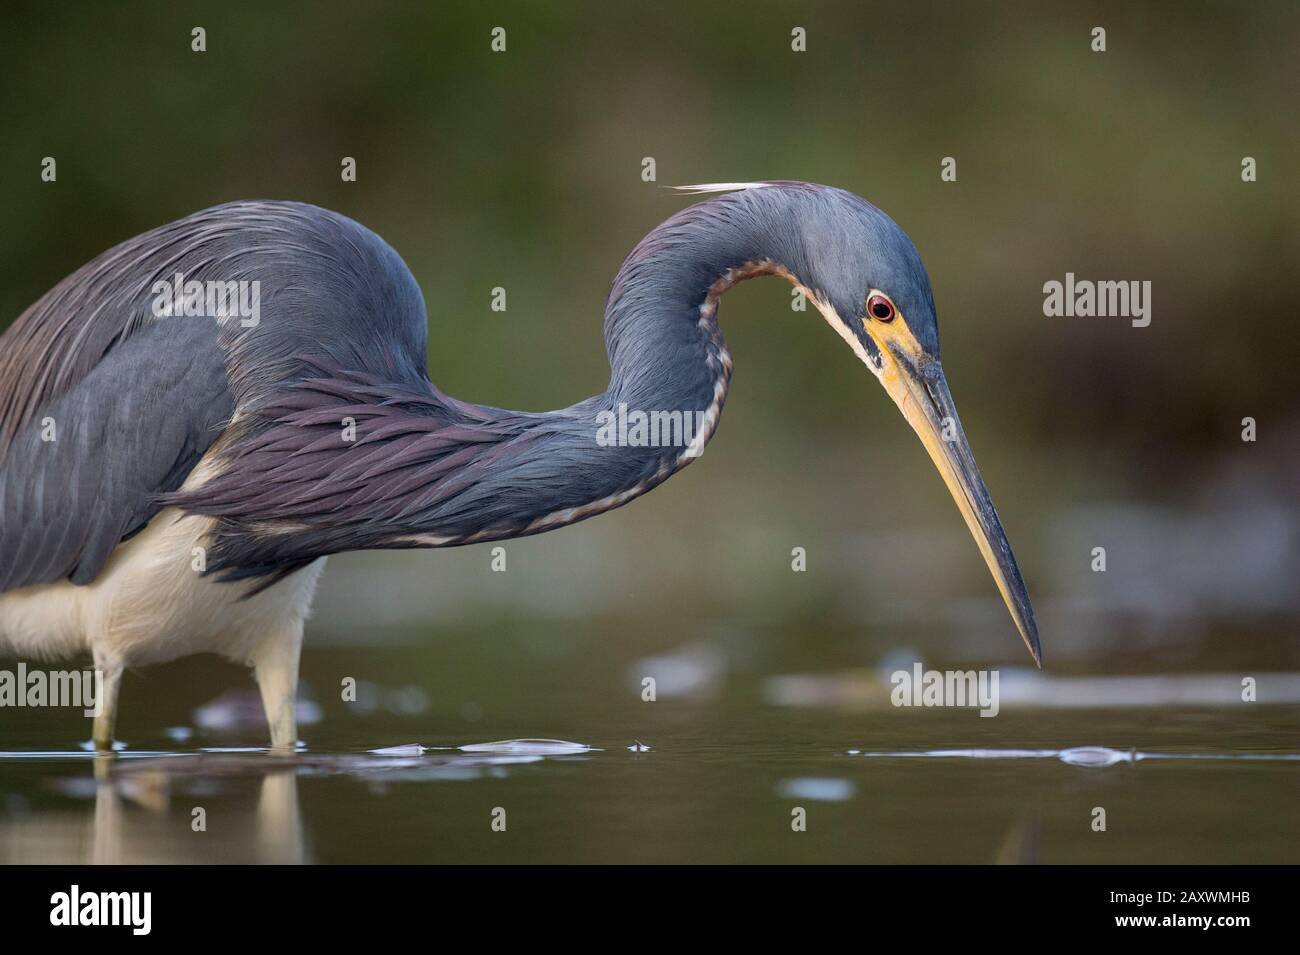 A Tricolored Heron wades in the shallow water in soft overcast light with a smooth green background. Stock Photo